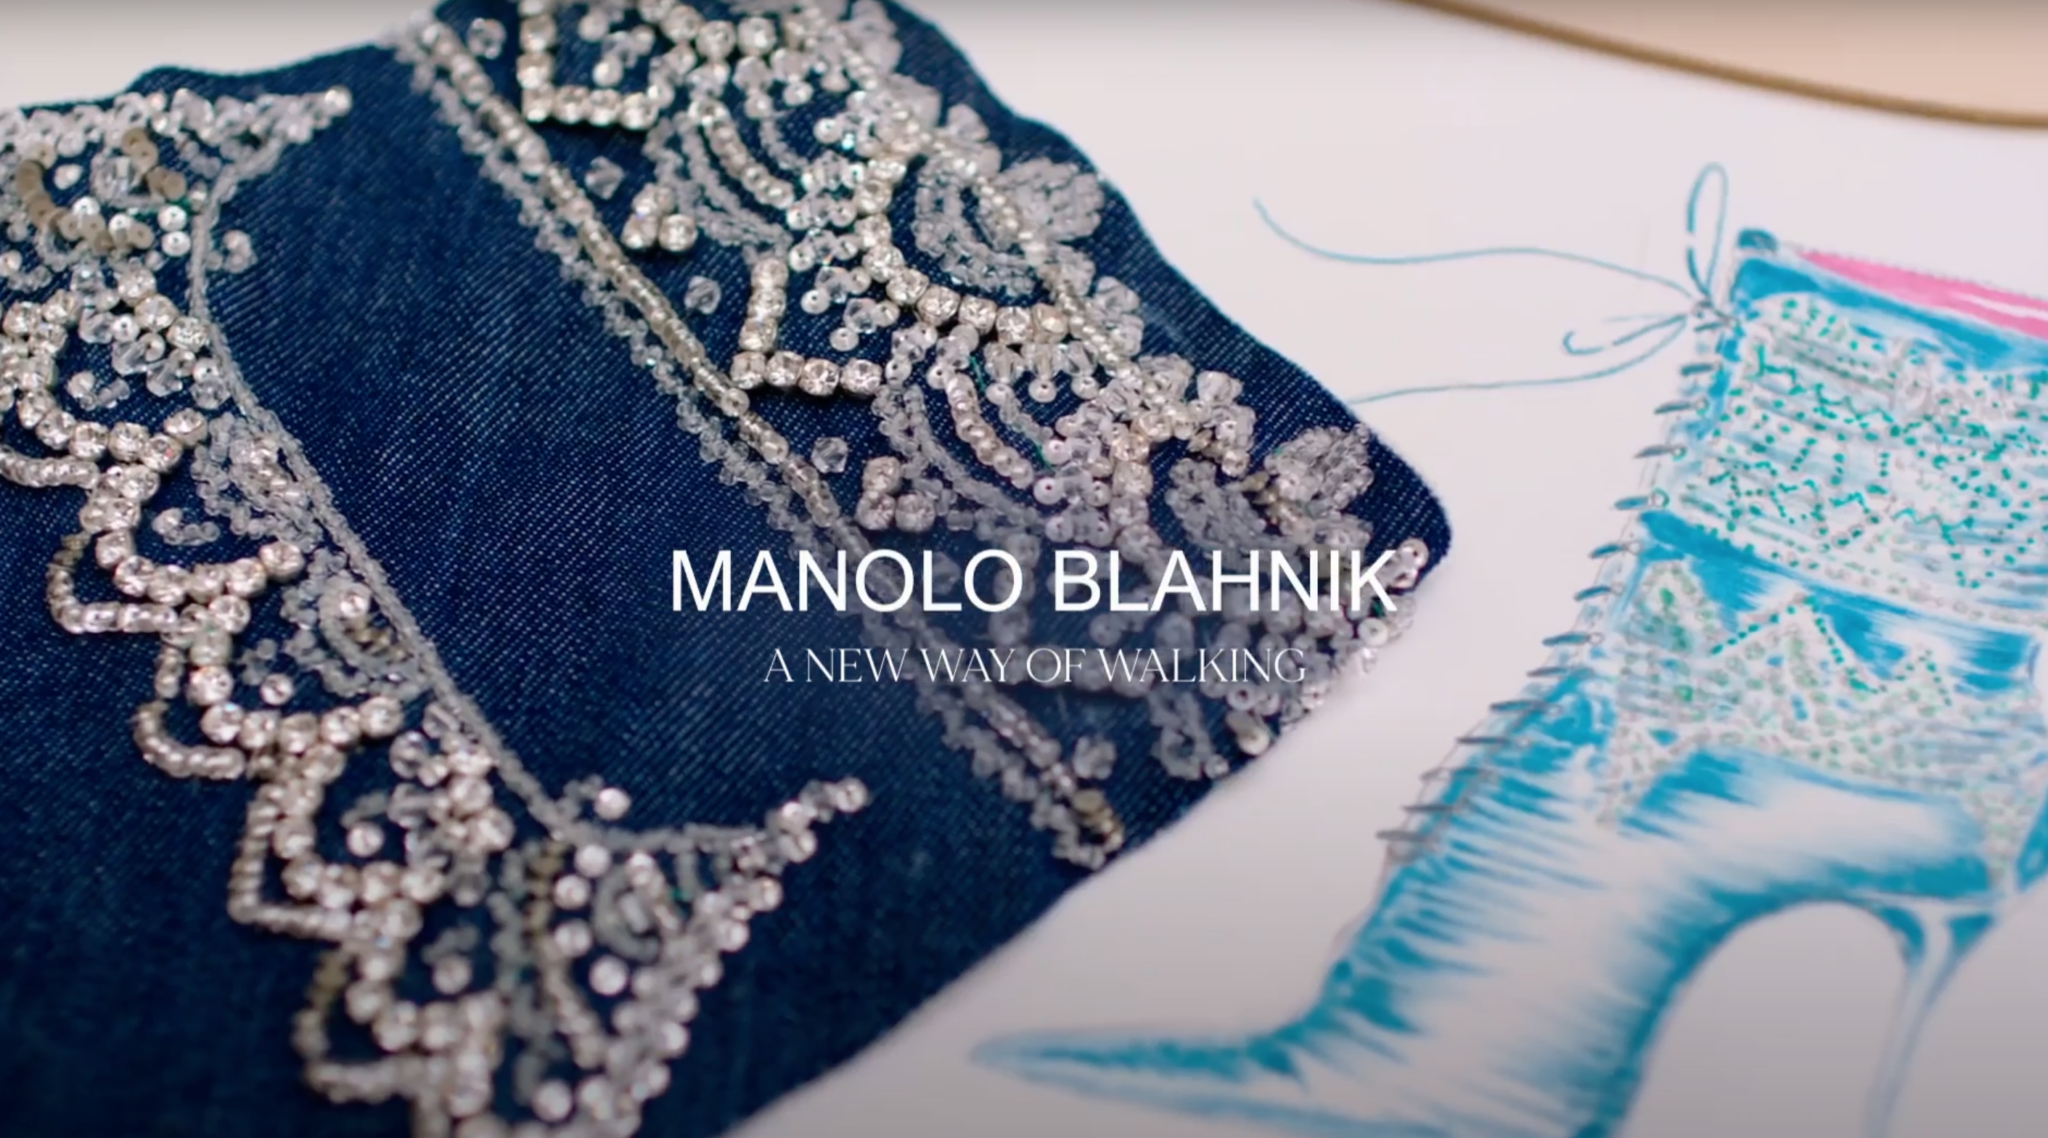 Behind The Manolo Blahnik Archives